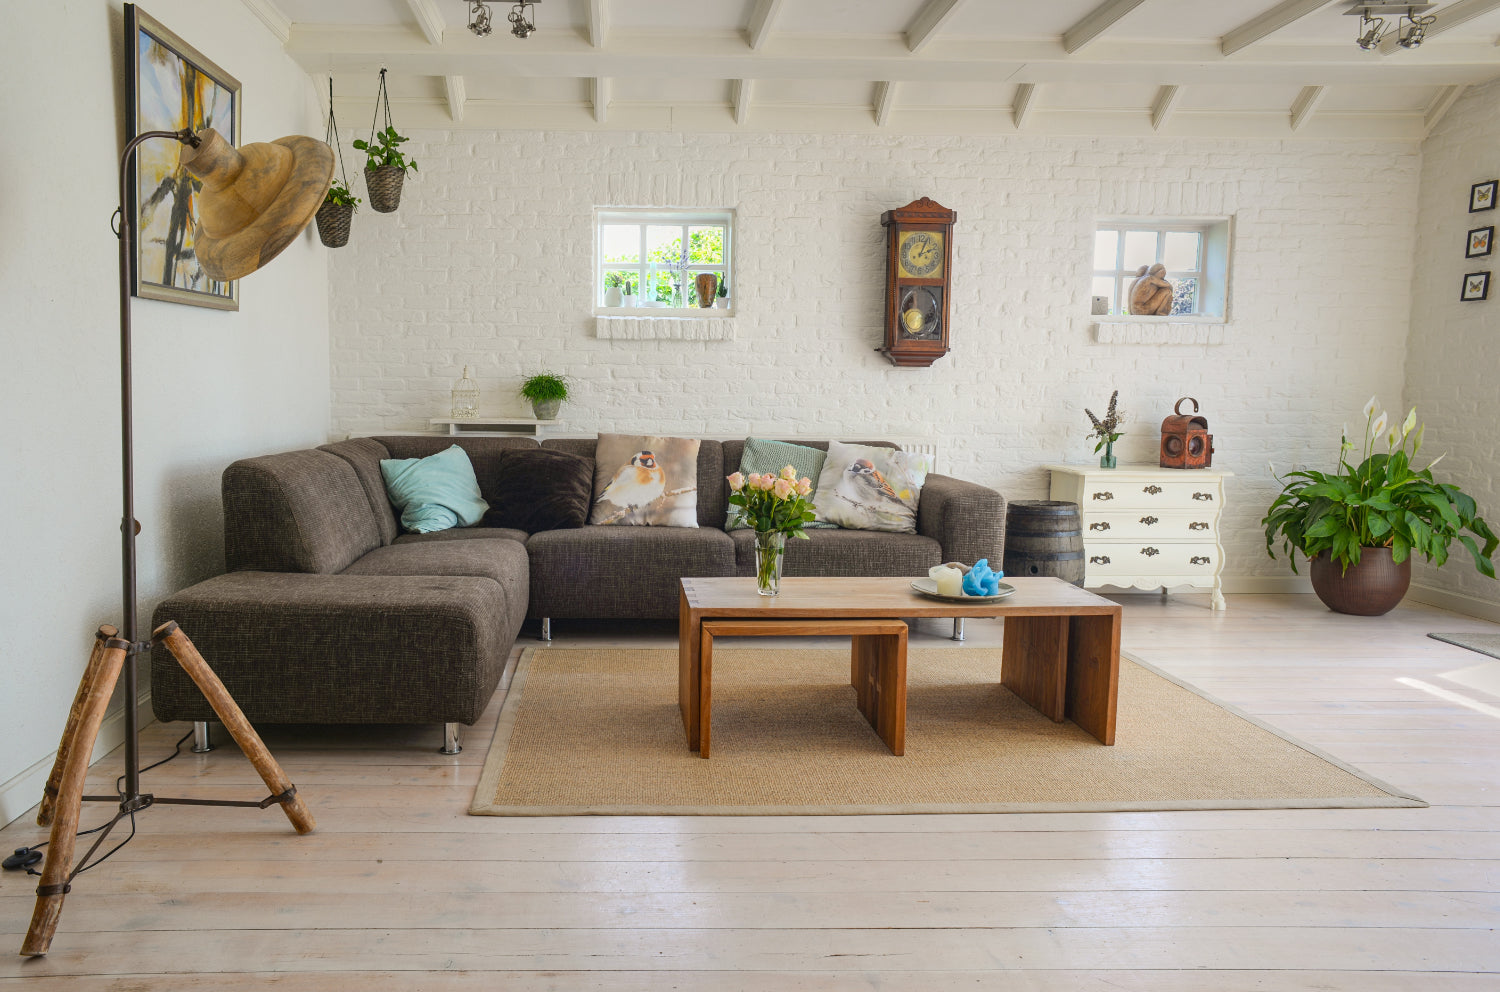 A modern living room that can be rented out online to make money